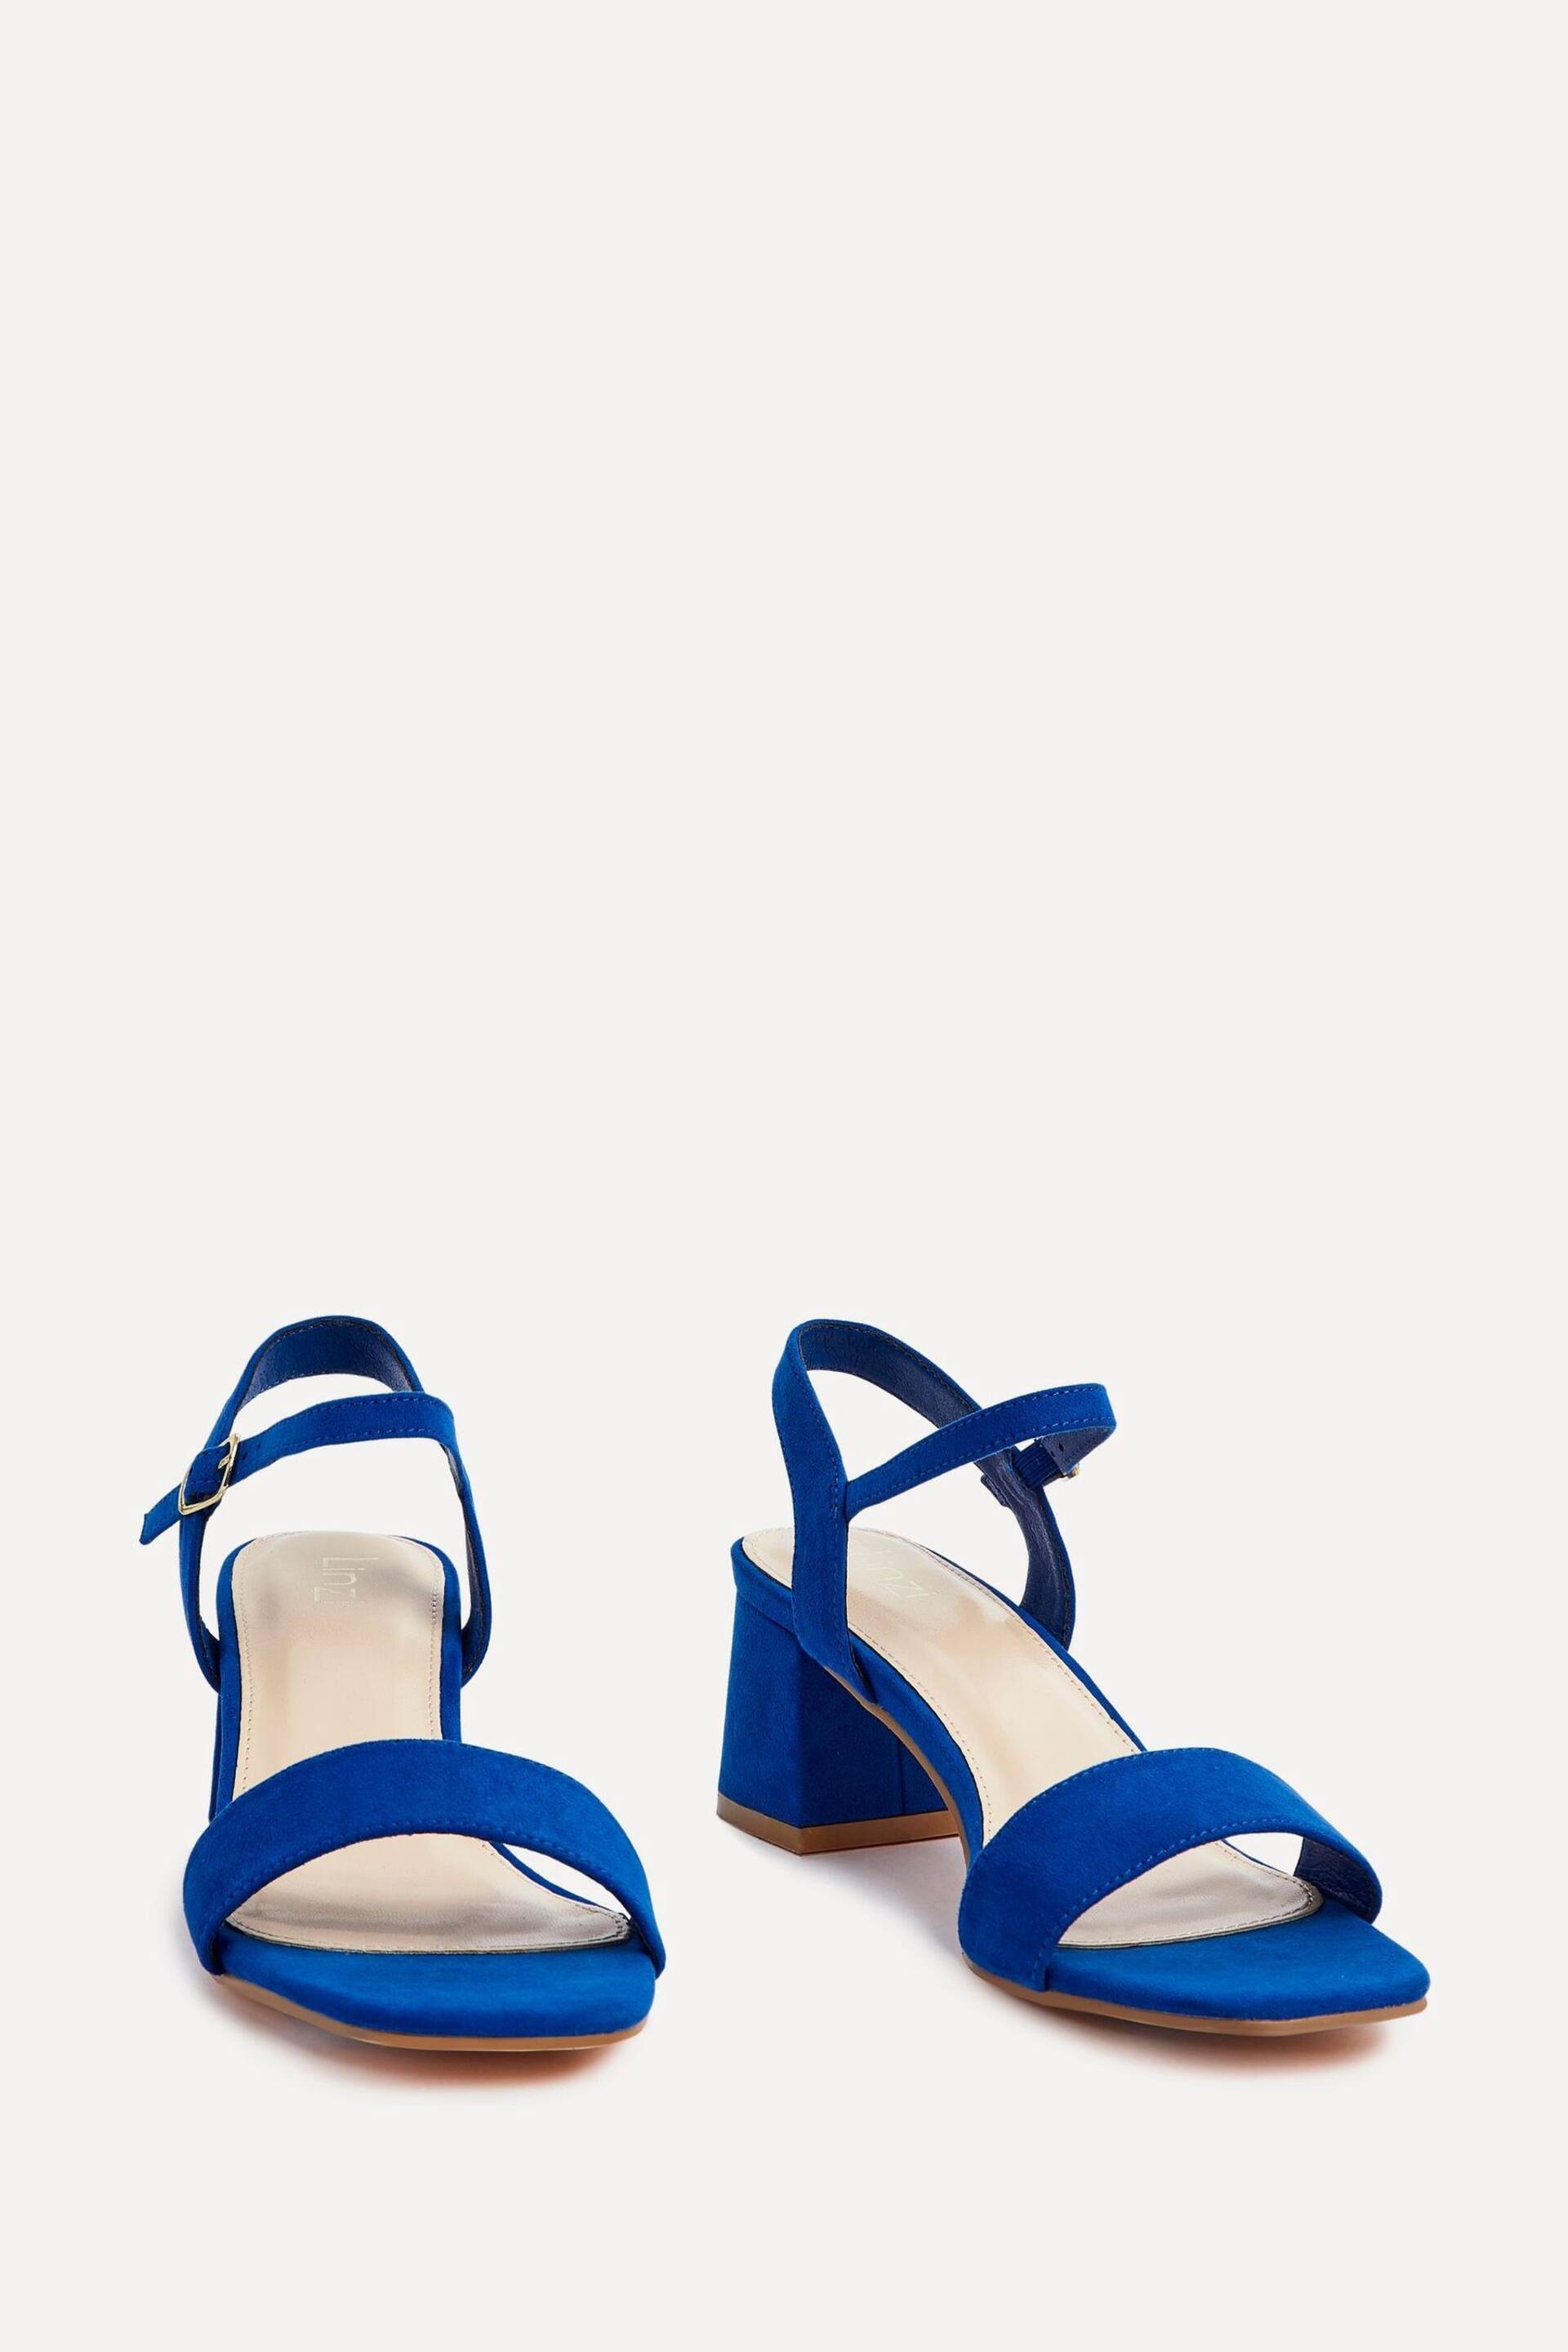 Linzi Cobalt Blue Darcie Barely There Block Heeled Sandals - Image 6 of 9